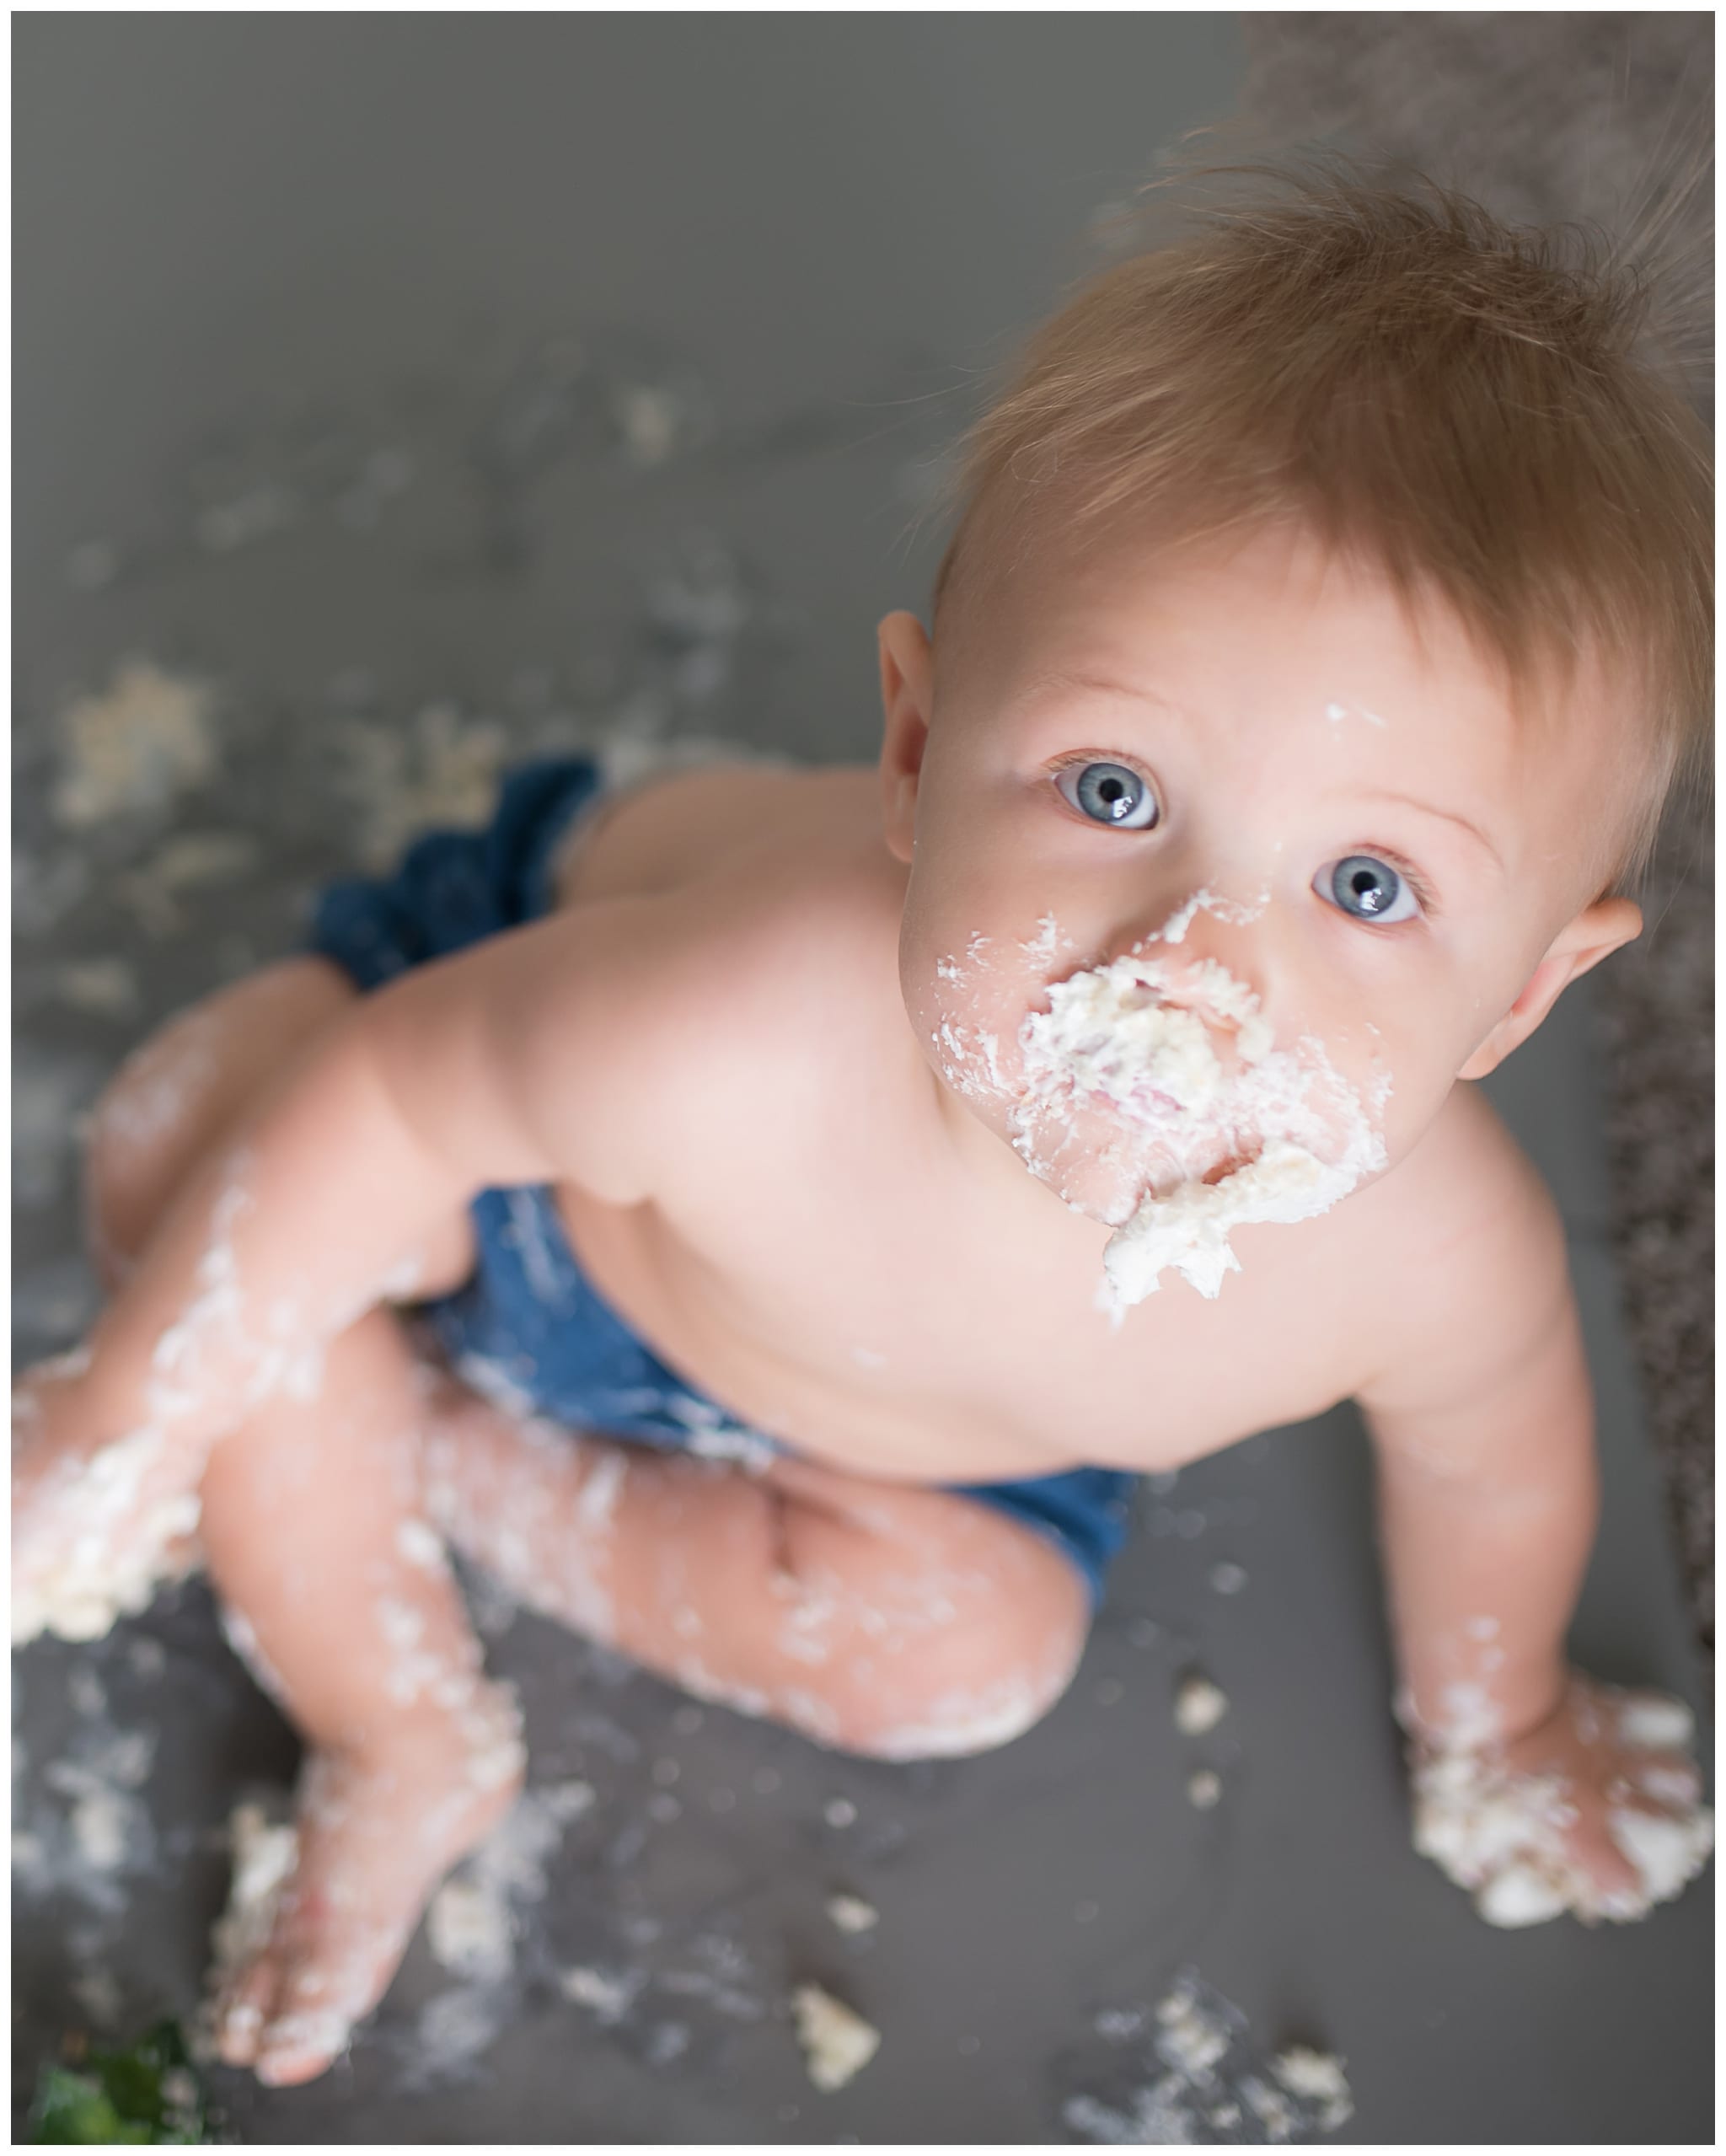 A baby with cake in their face!